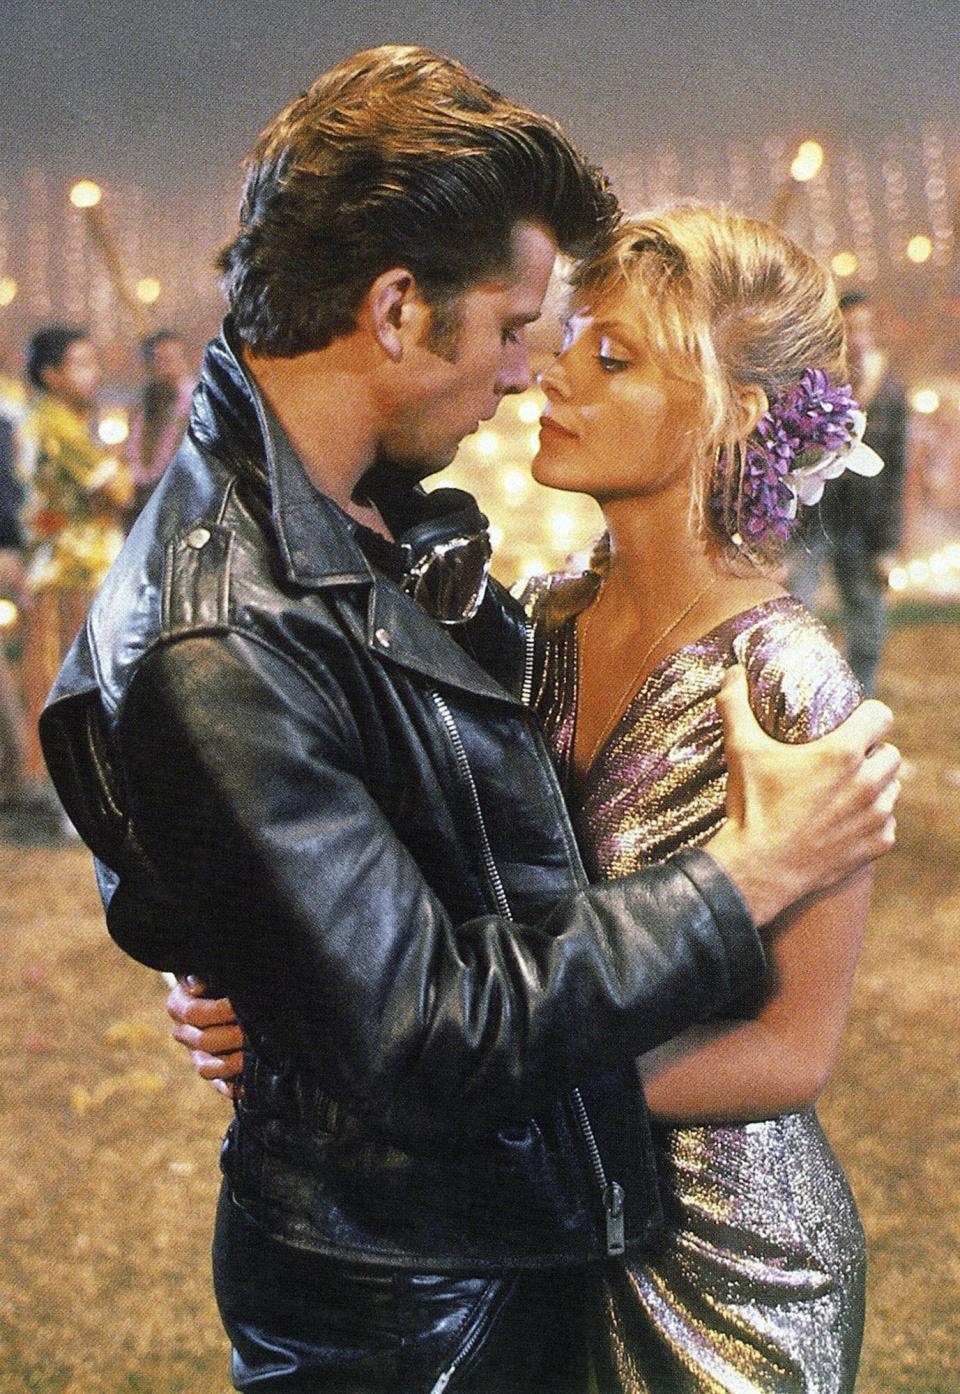 Michael (Maxwell Caulfield) and Stephanie (Michelle Pfeiffer) reunite in 'Grease 2'